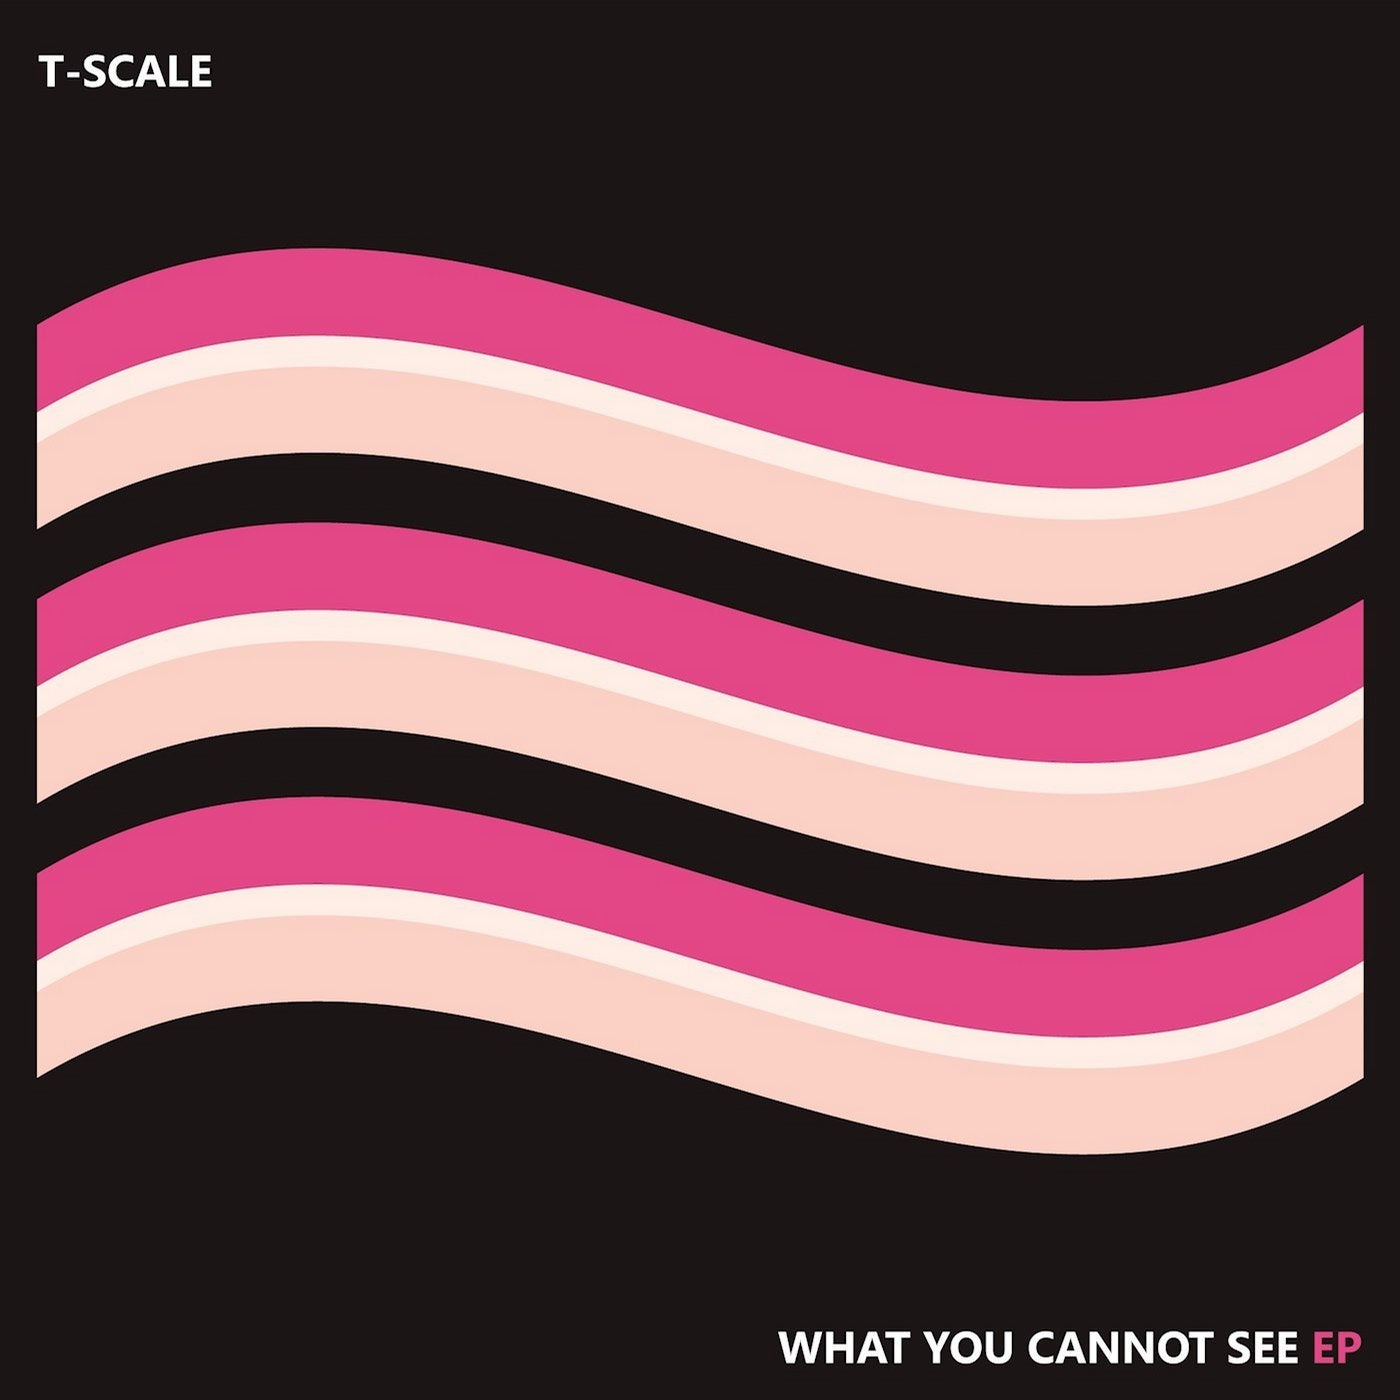 What You Cannot See EP